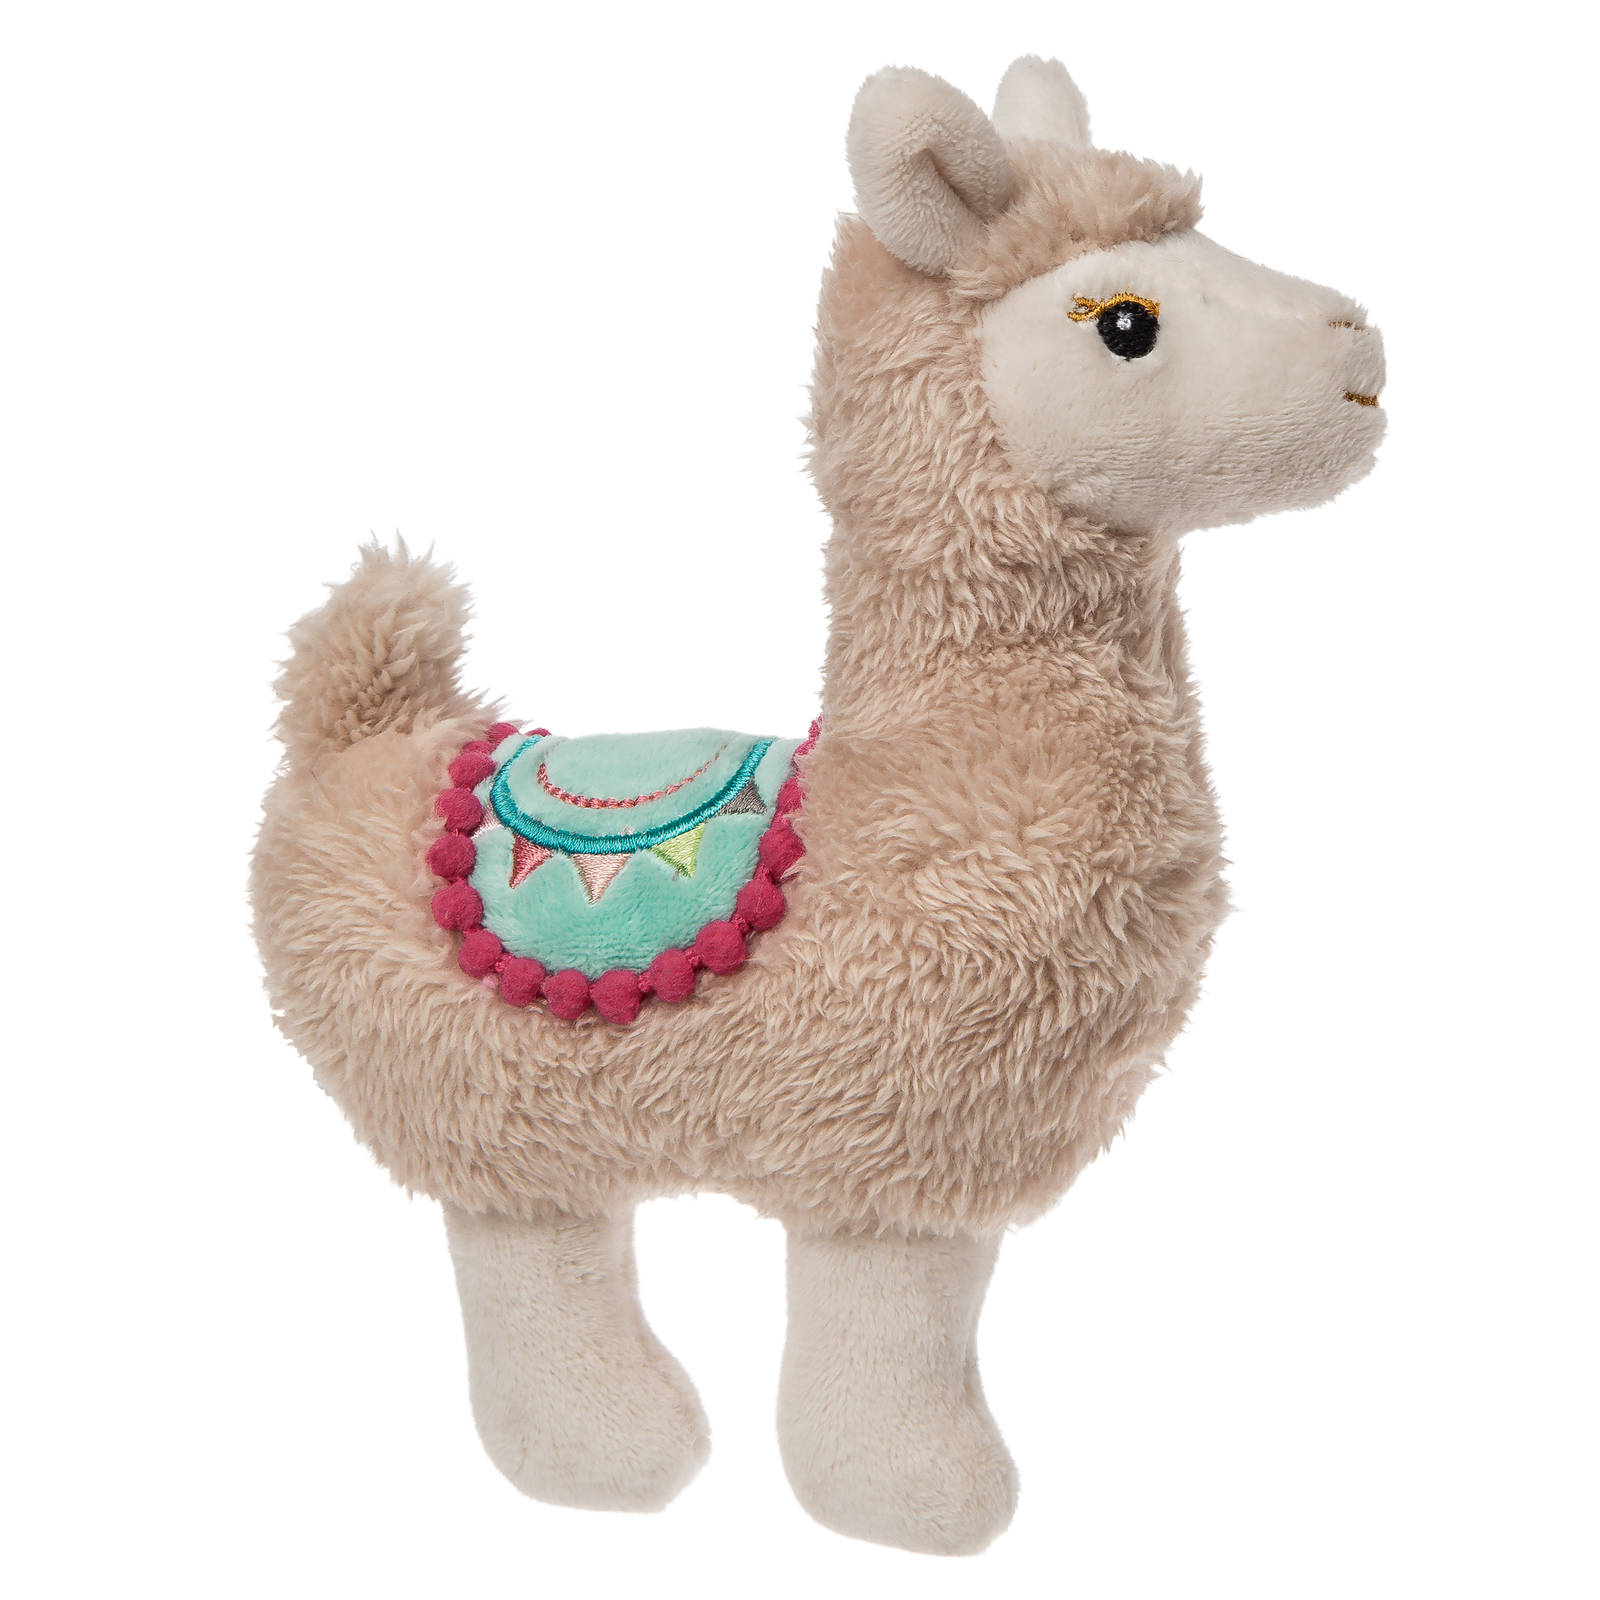 Lily Llama Rattle by Mary Meyer (43060) - $8.99